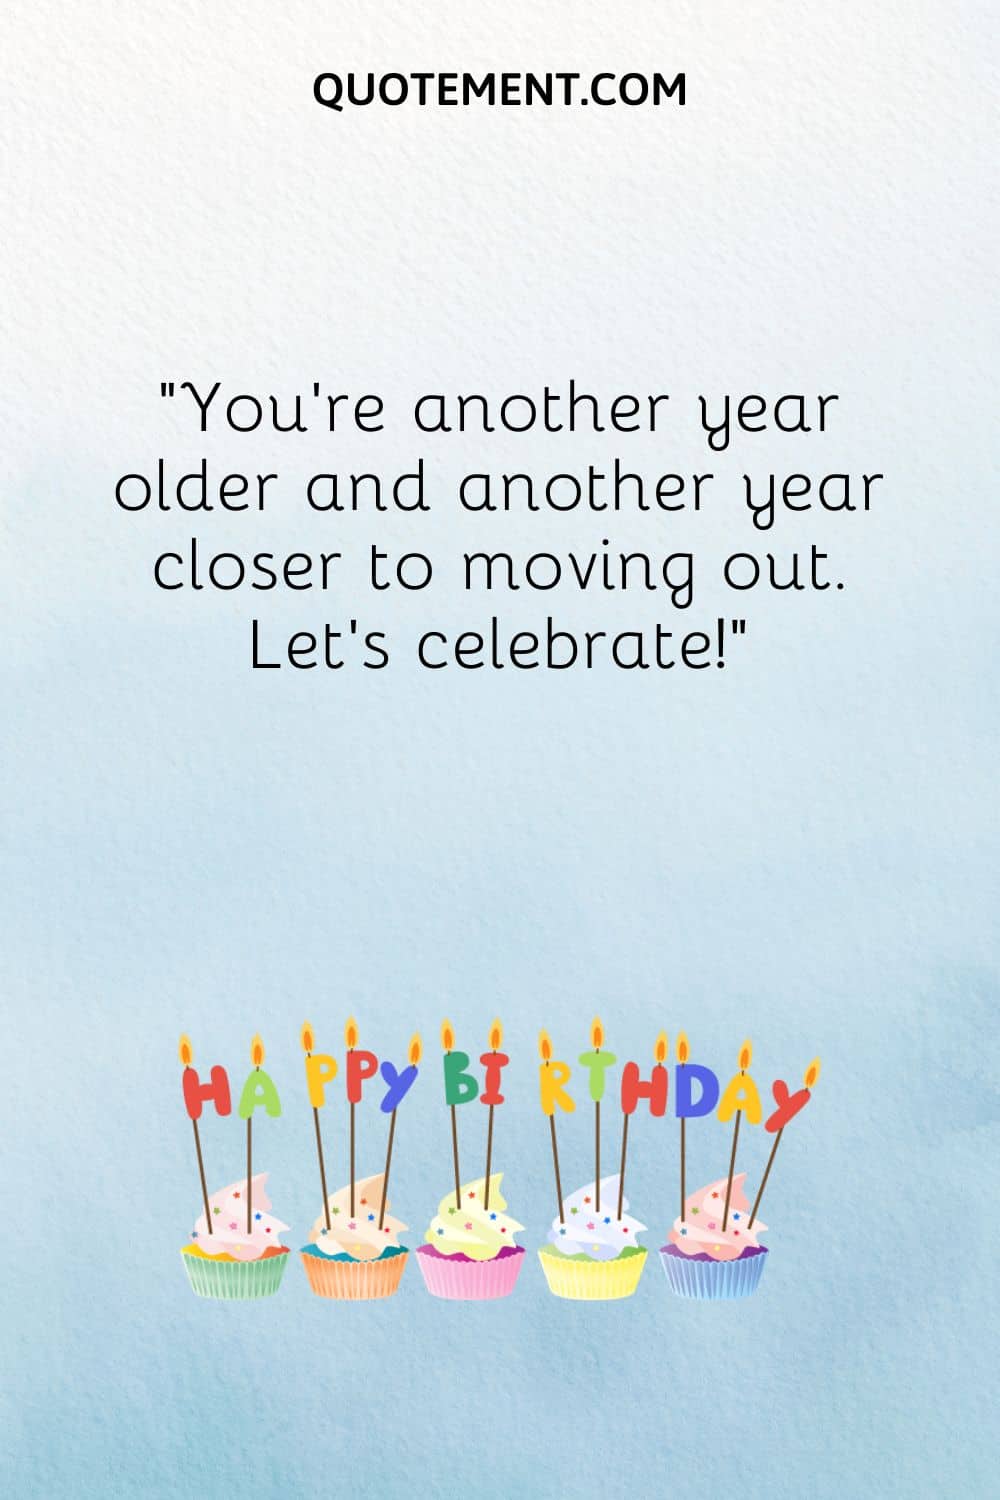 You're another year older and another year closer to moving out